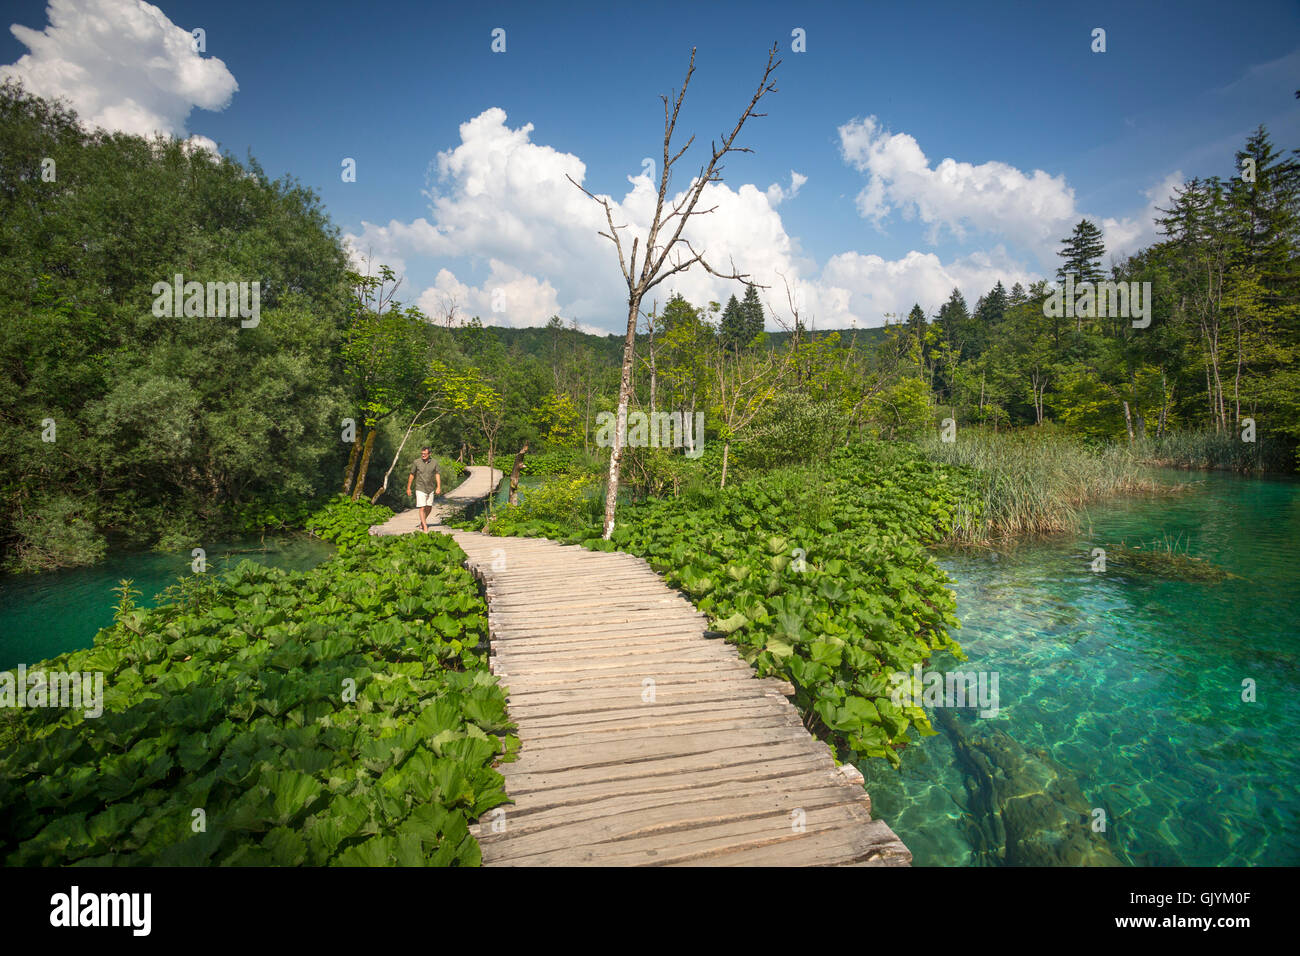 A tourist strolling on a wooden walkway lined by butterburs (Petasites). Plitvice Lakes National Park Croatia. Blue water. Stock Photo